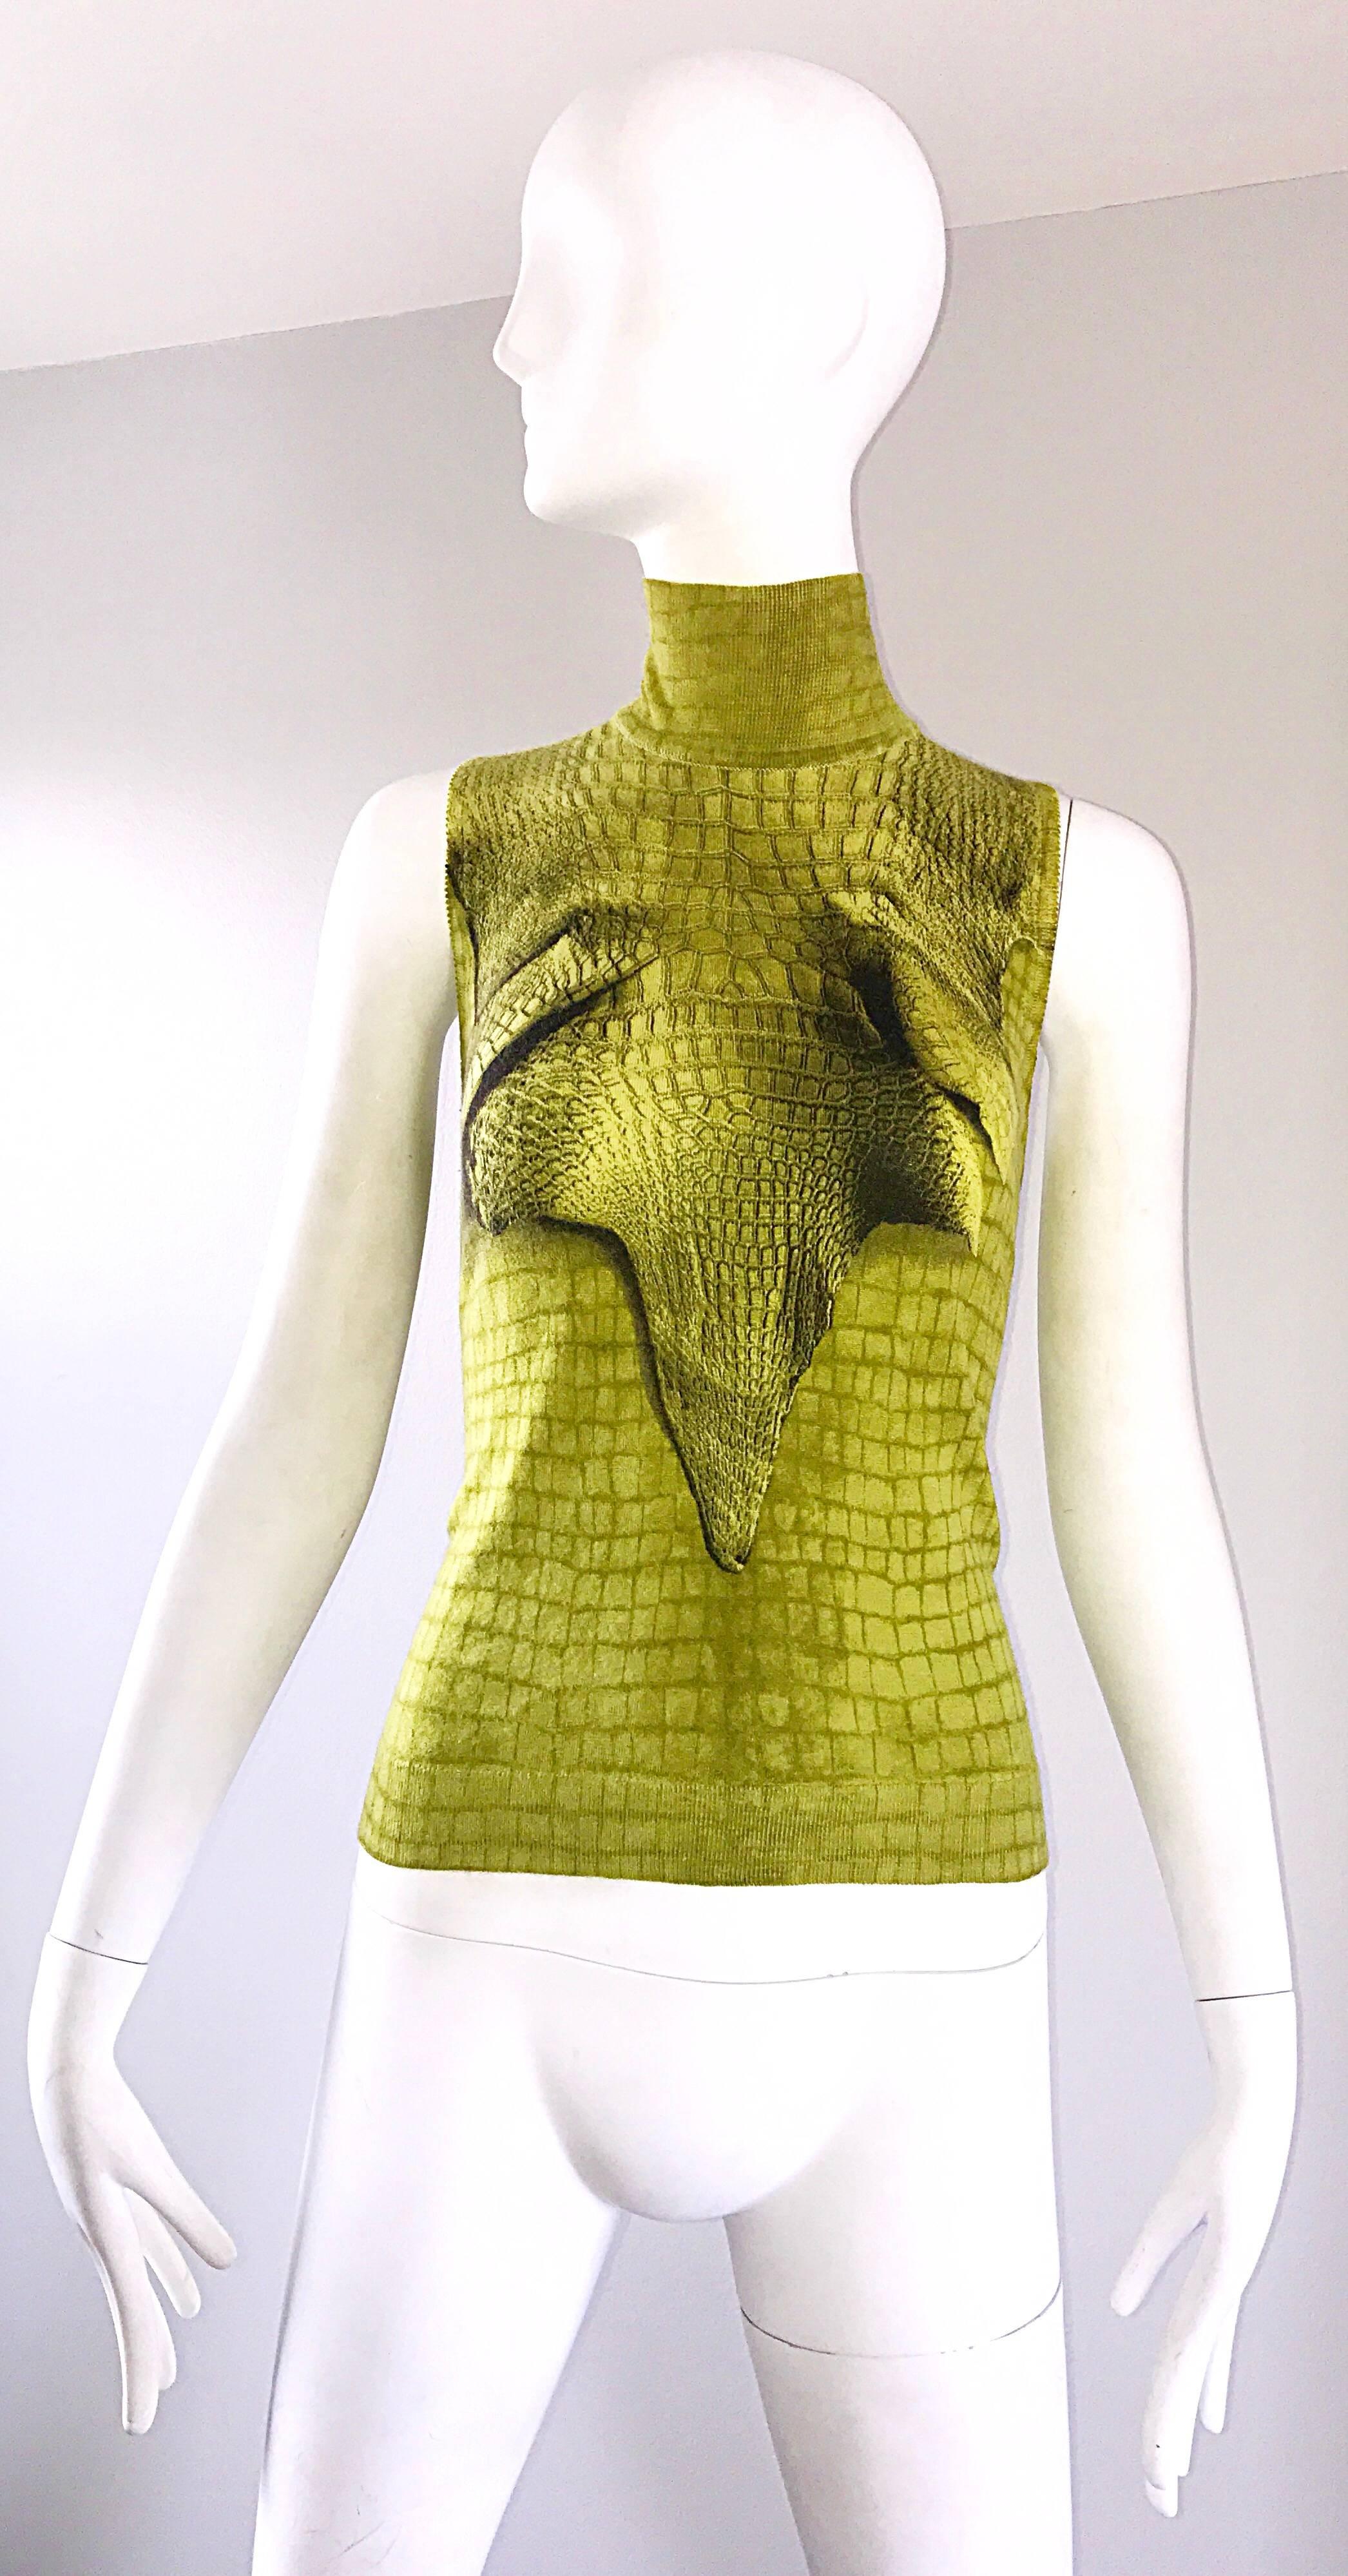 Chic 90s vintage JOHN GALLIANO Tromp L'Oeil alligator / crocodile print sleeveless cashmere turtleneck sweater. Features a chic animal print with an amazing print! Extremely soft and luxurious Italian cashmere. Wonderful fit with heavy attention to